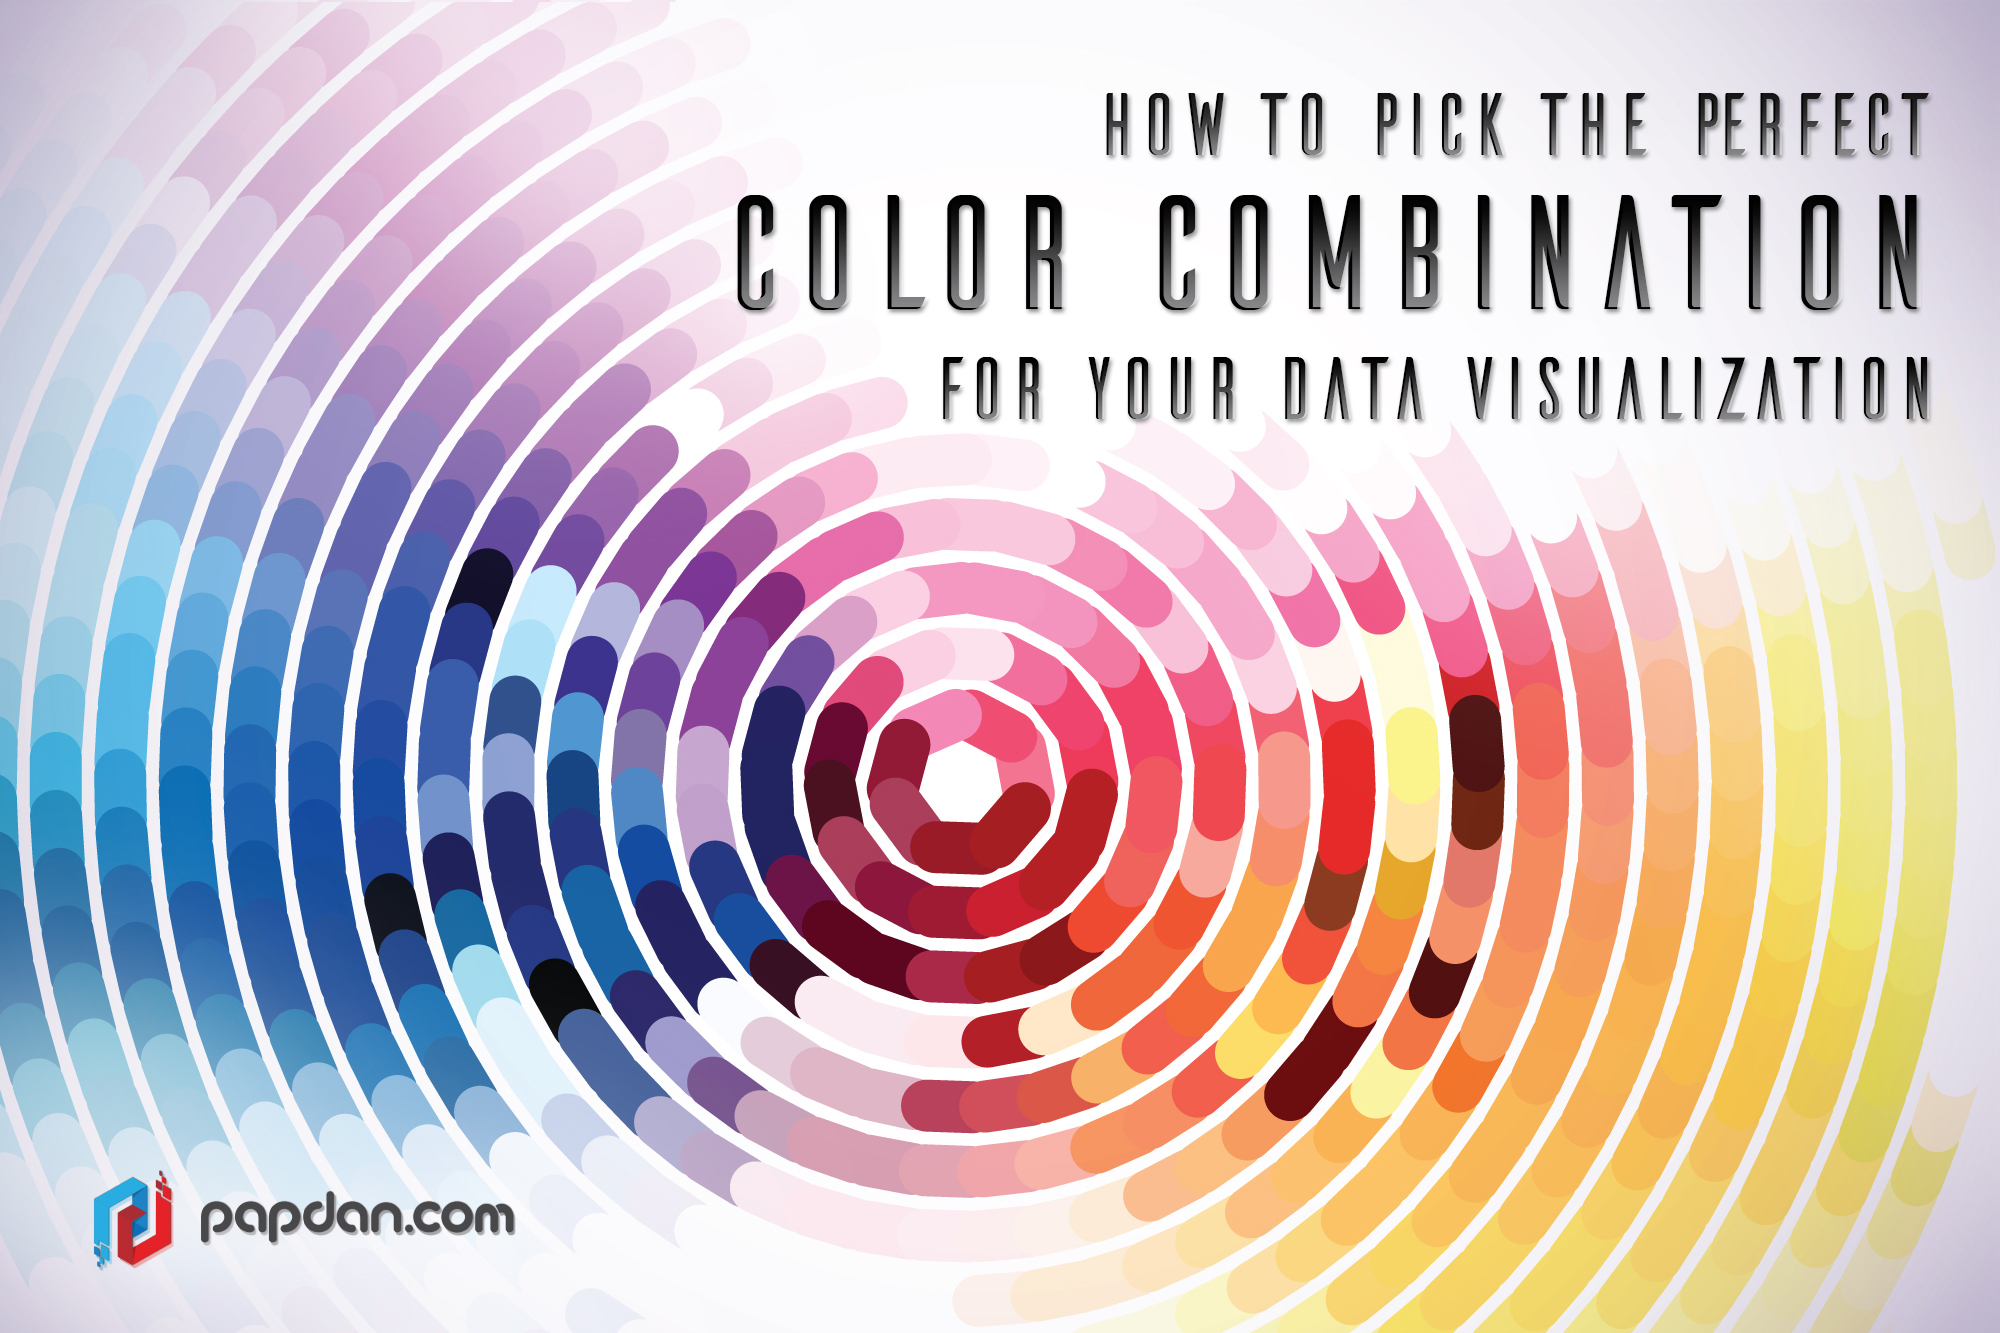 How to Create the Perfect Color Combination for Your Data Visualization